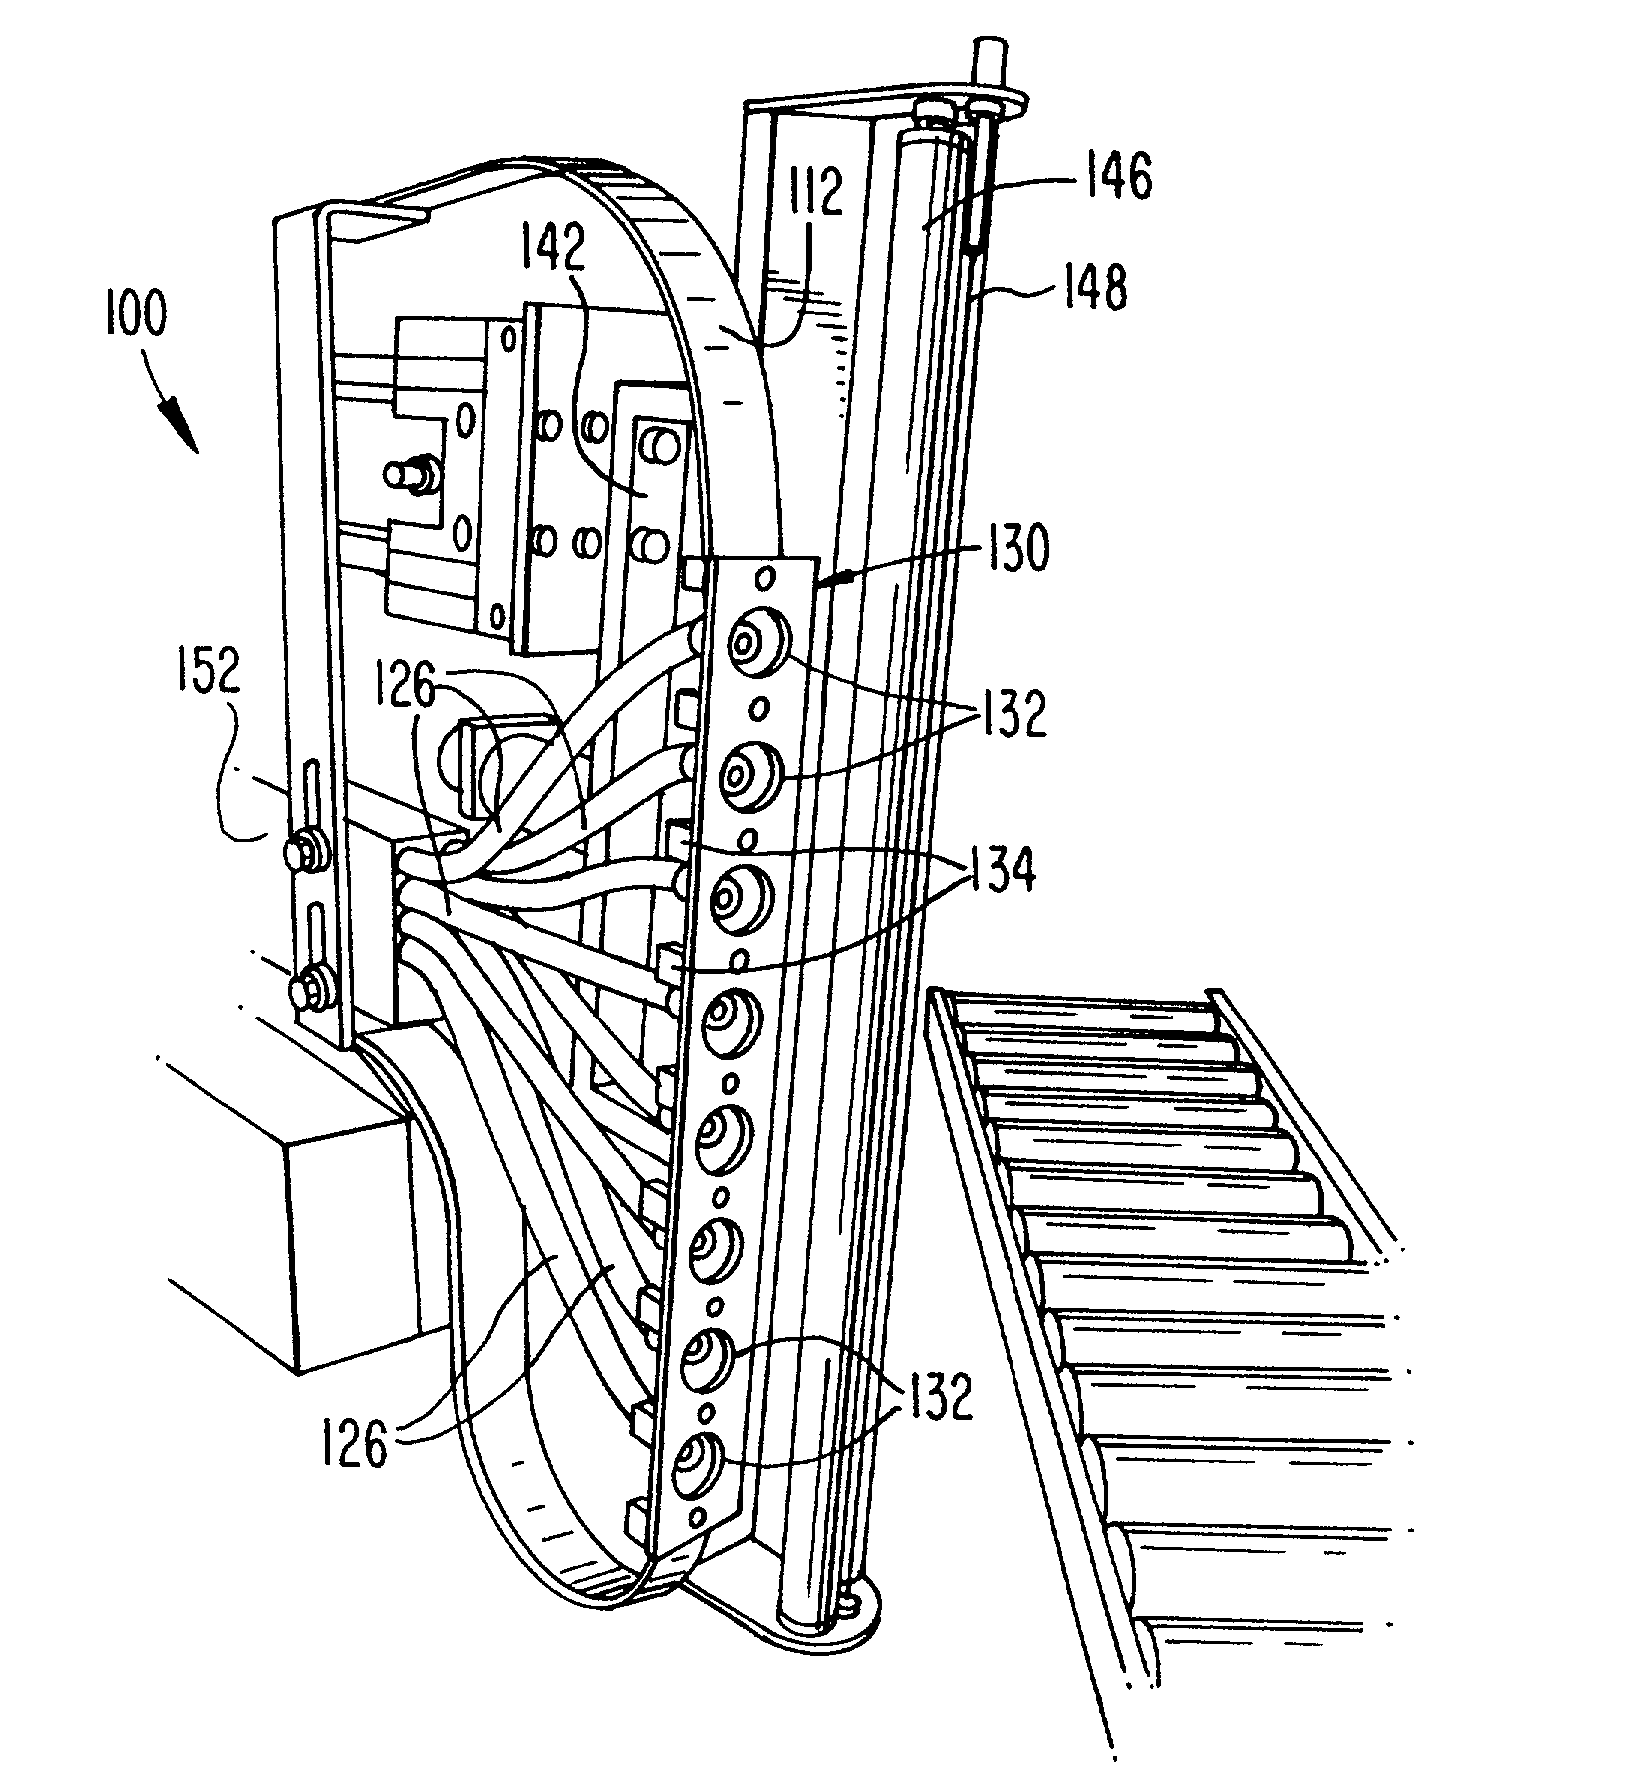 Heat sealer for stretch wrapping apparatus